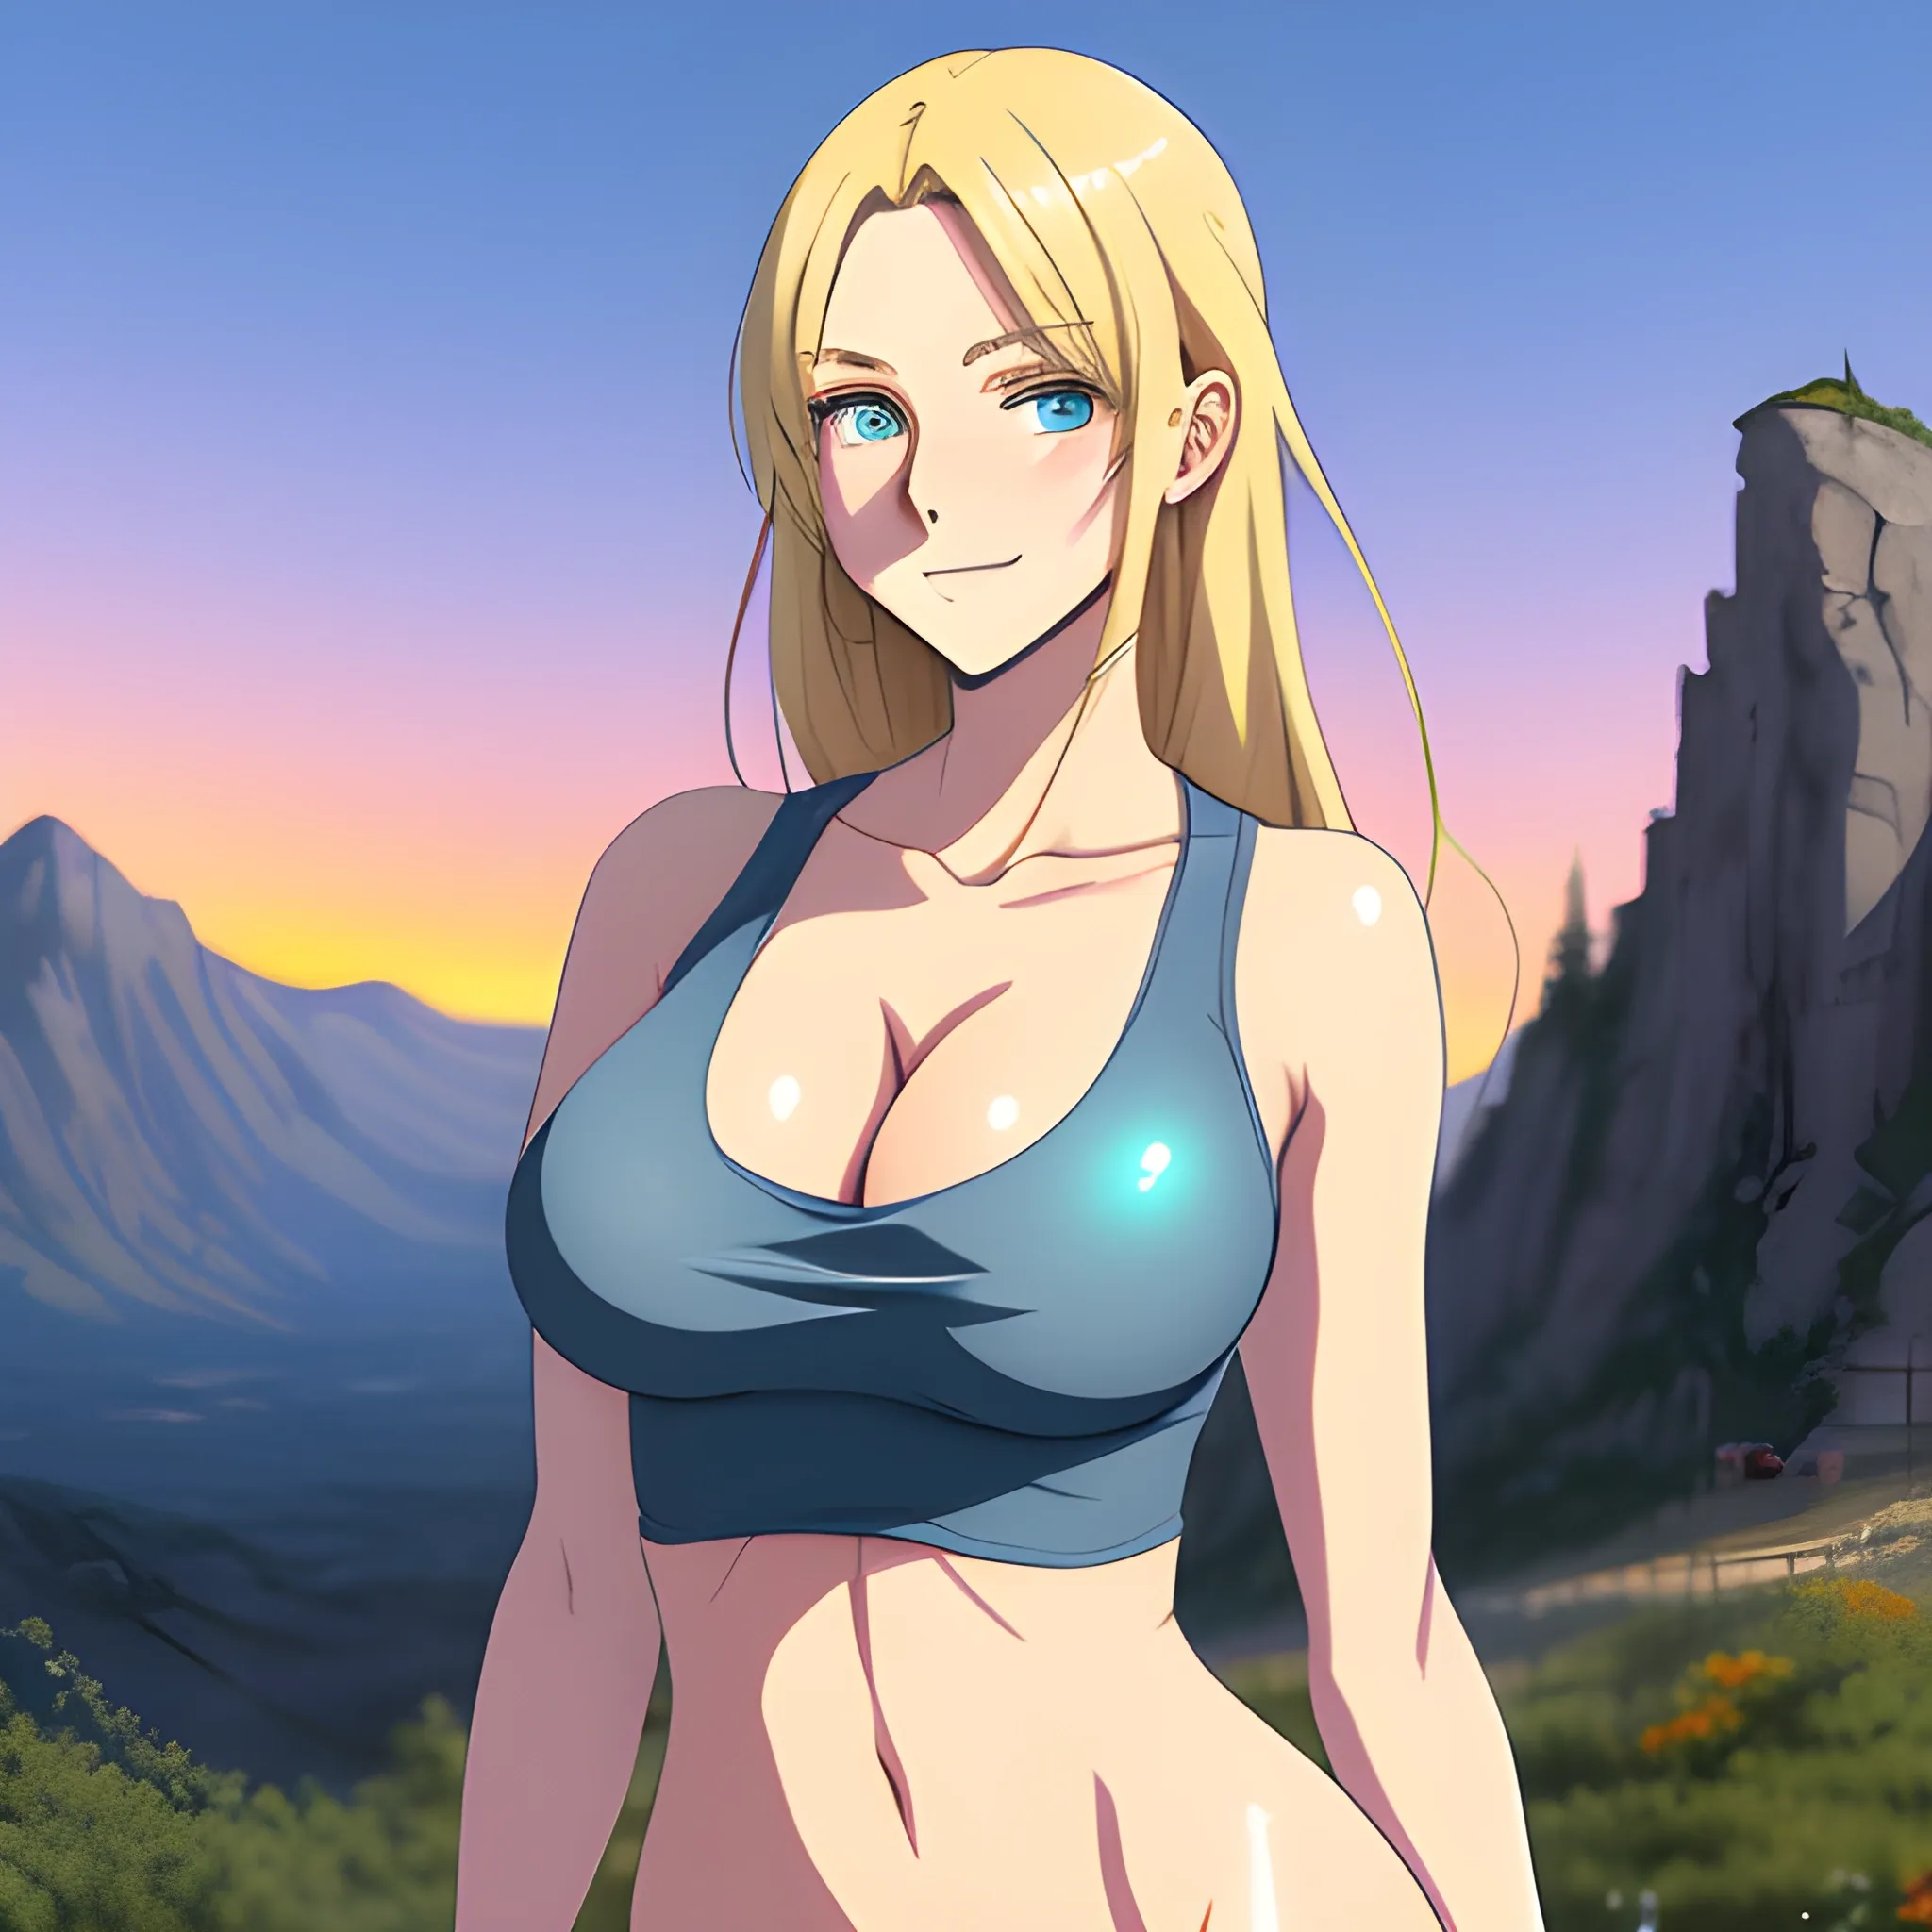 Anime art, cute young girl, thin and flat without breast, semi-long blond hair in motion, rosy cheeks, tender face, big watery blue eyes, looks sad face, tilted face, wearing a tank top not revealing, magical and luminous aura around herself, light cinematographic, volumetric light, highly detailed, magic fantasy orange sky in background with sunset, stars and big rocky mountains in beginning of dusk, digital painting, 

size: 3048x3048